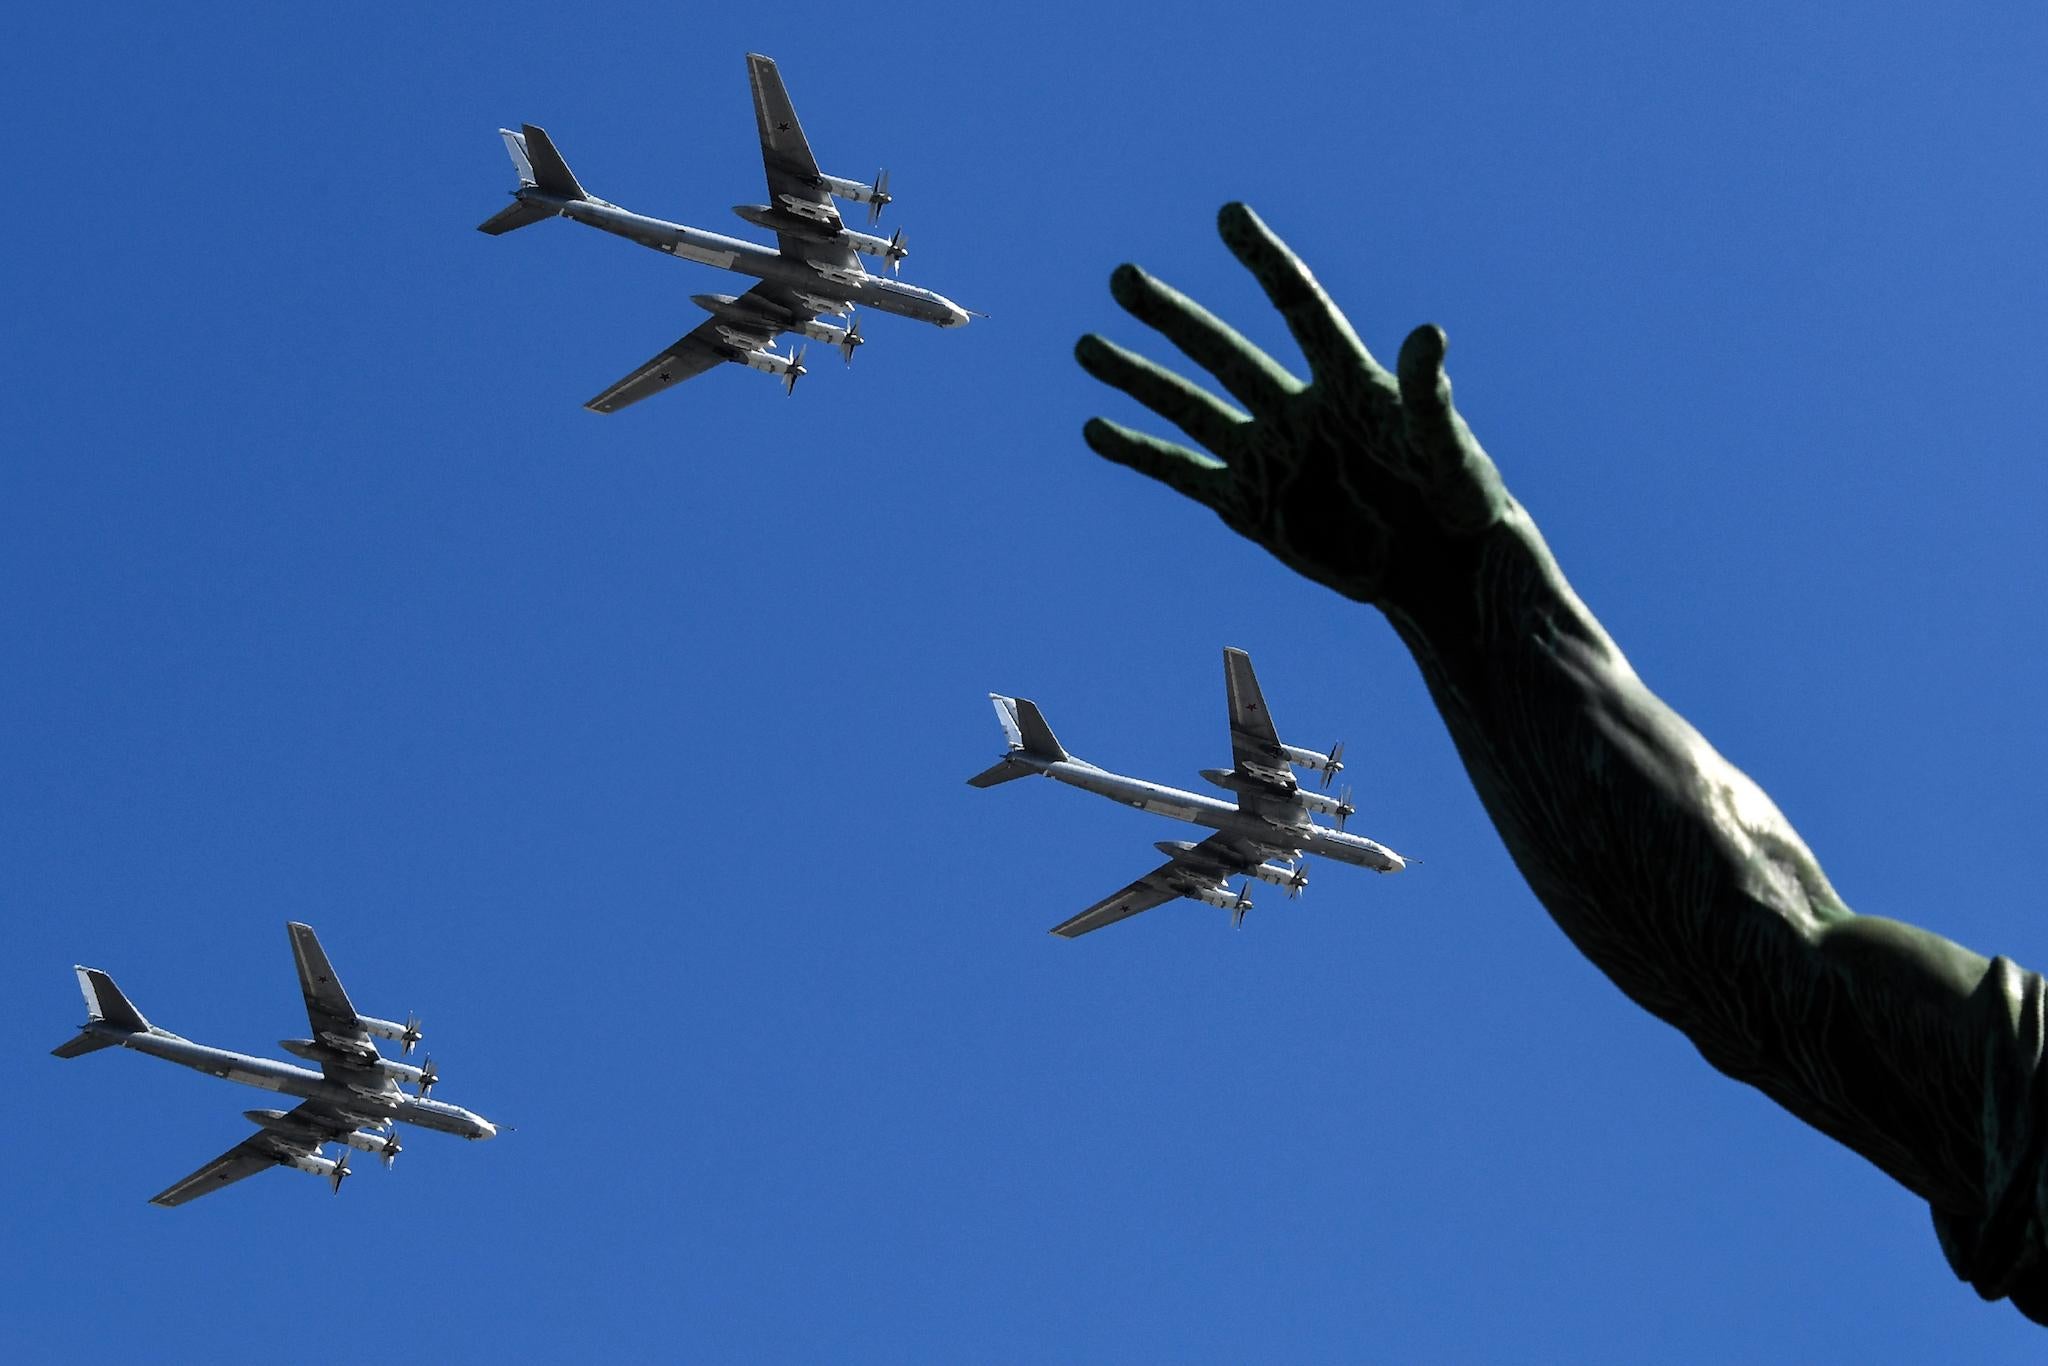 Russian Tu-95MS strategic bombers fly over Red Square during a rehearsal for the Victory Day military parade in Moscow